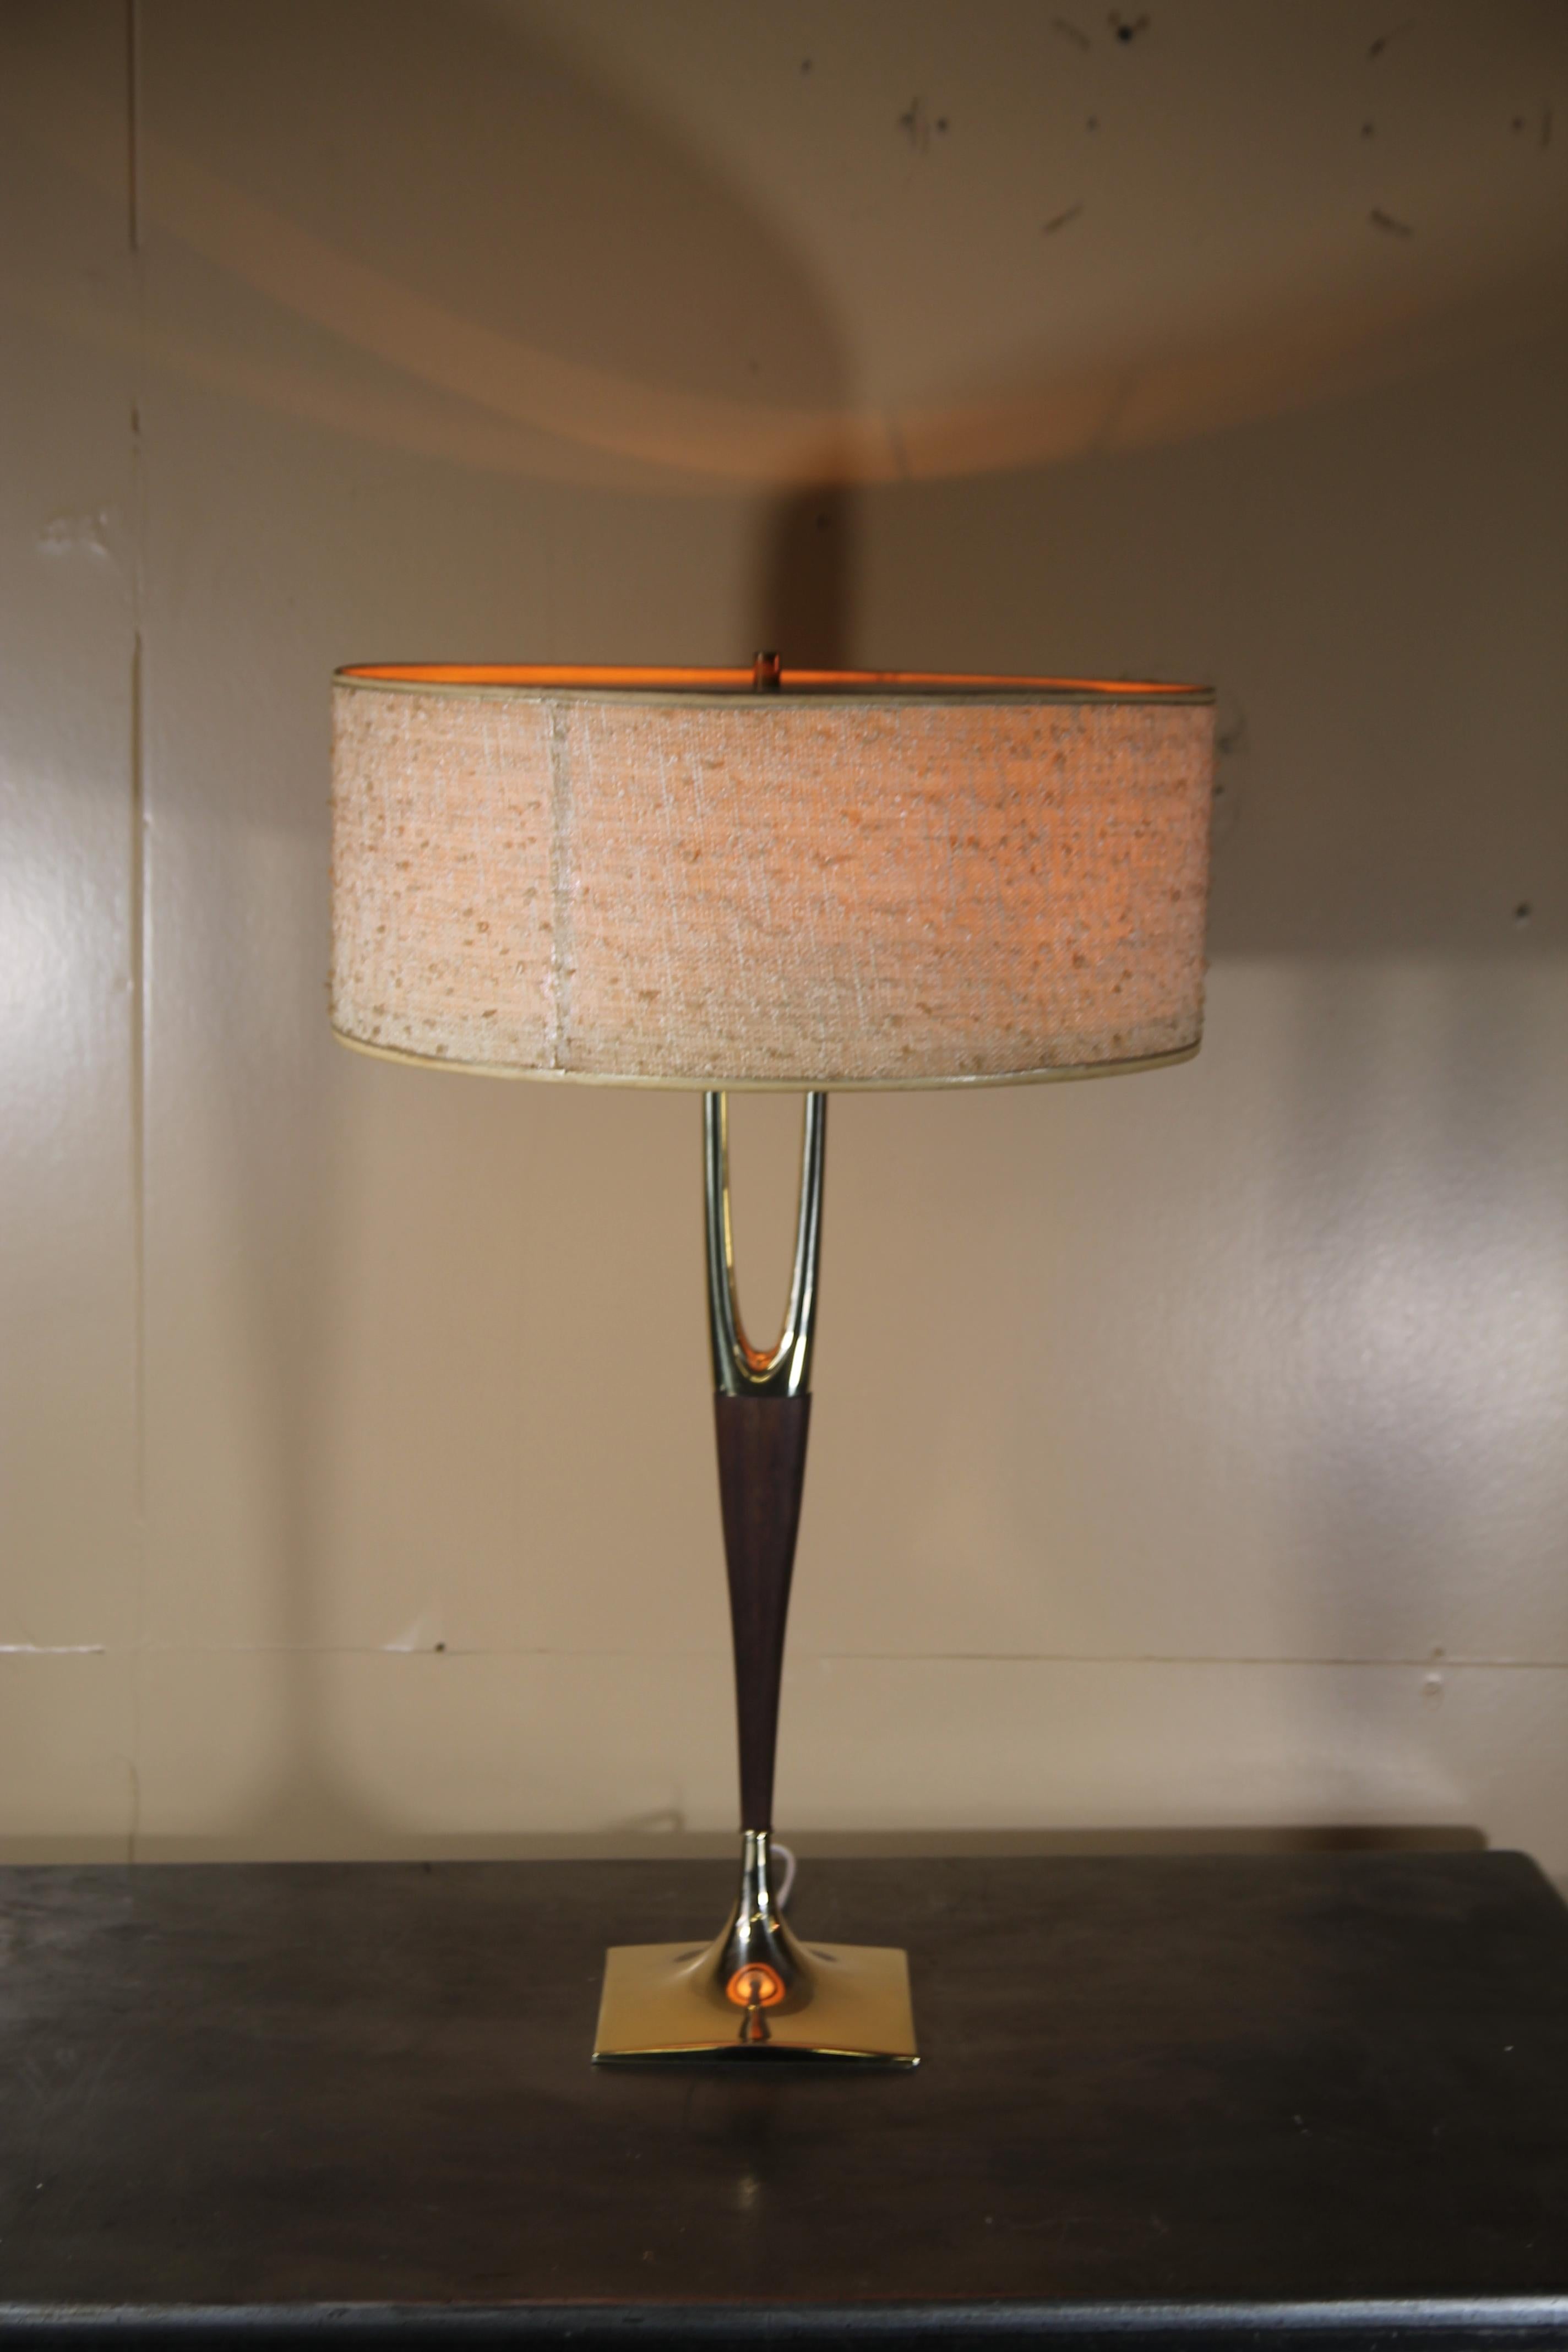 Wonderful Lamp designed by Gerald Thurston.  Has original shade, diffuser and reflector